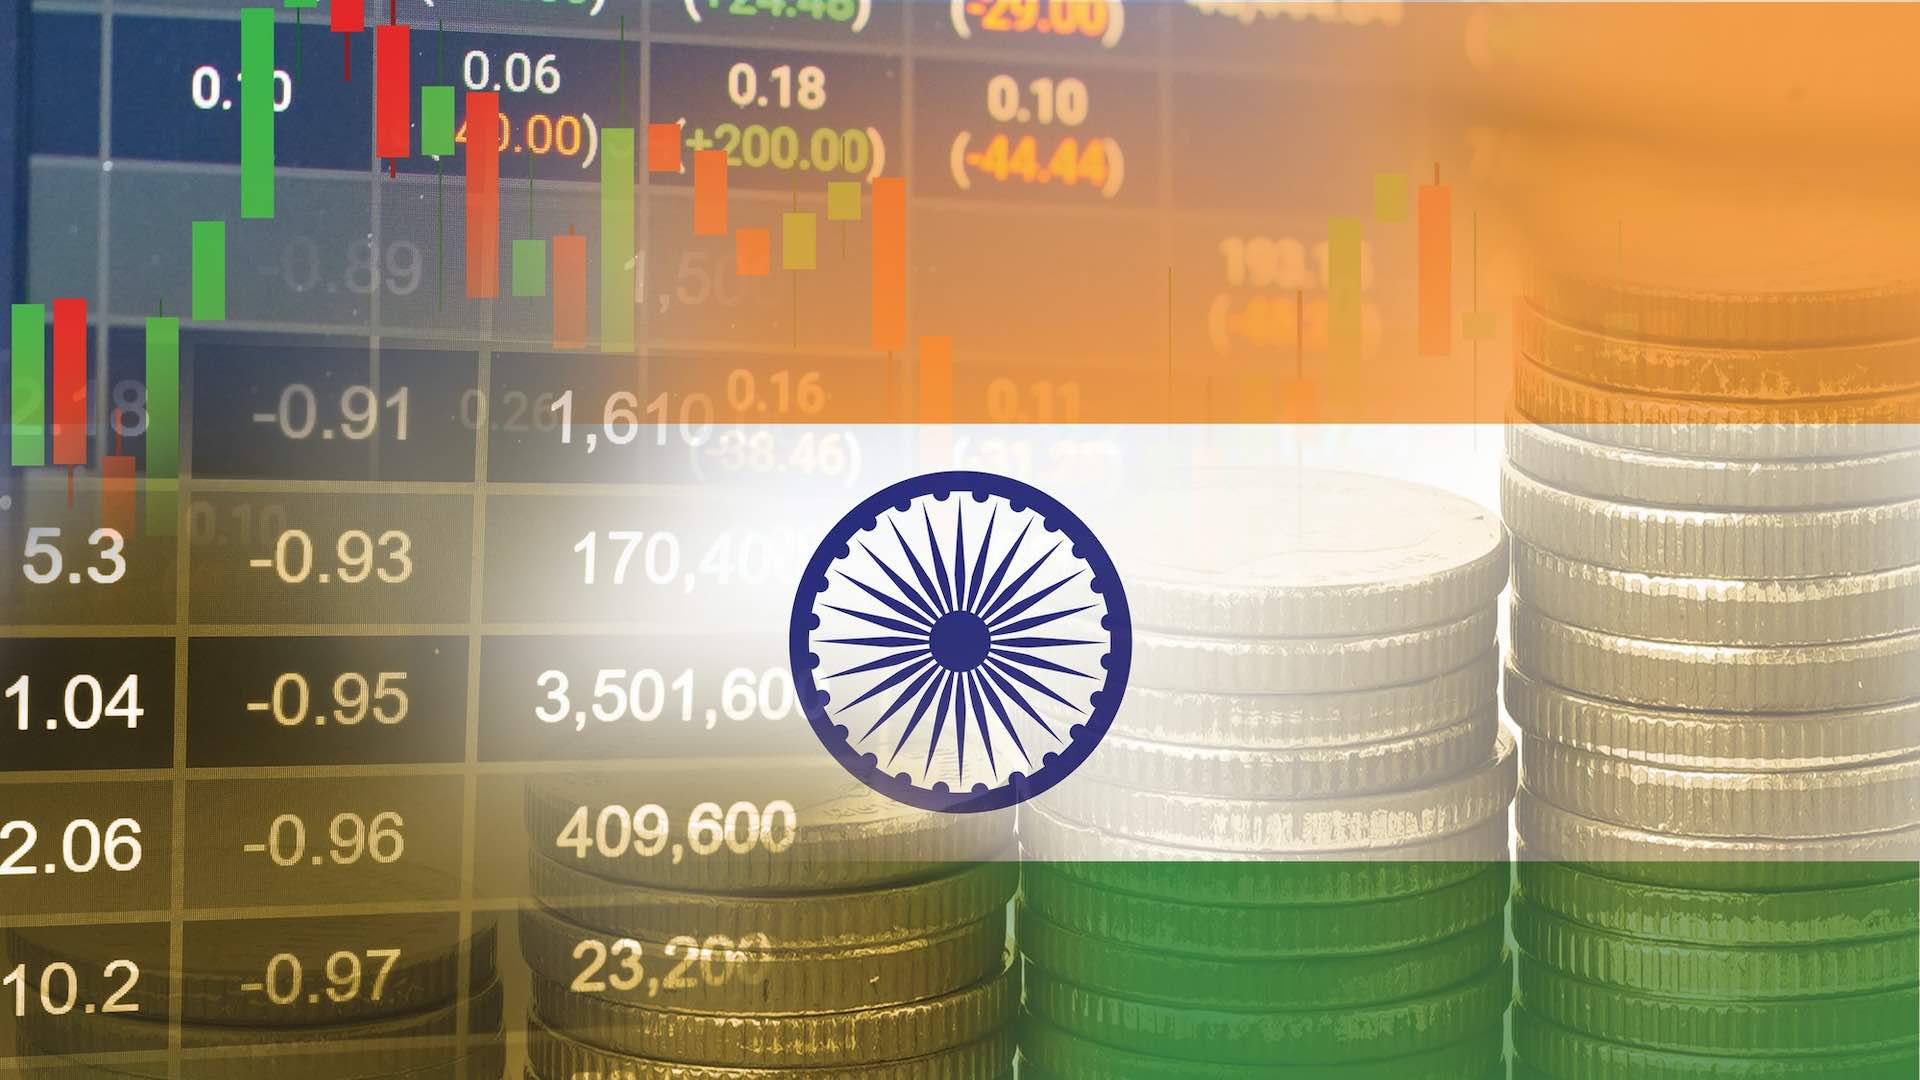 India to surpass US as second largest world economy by 2075, predicts Goldman Sachs